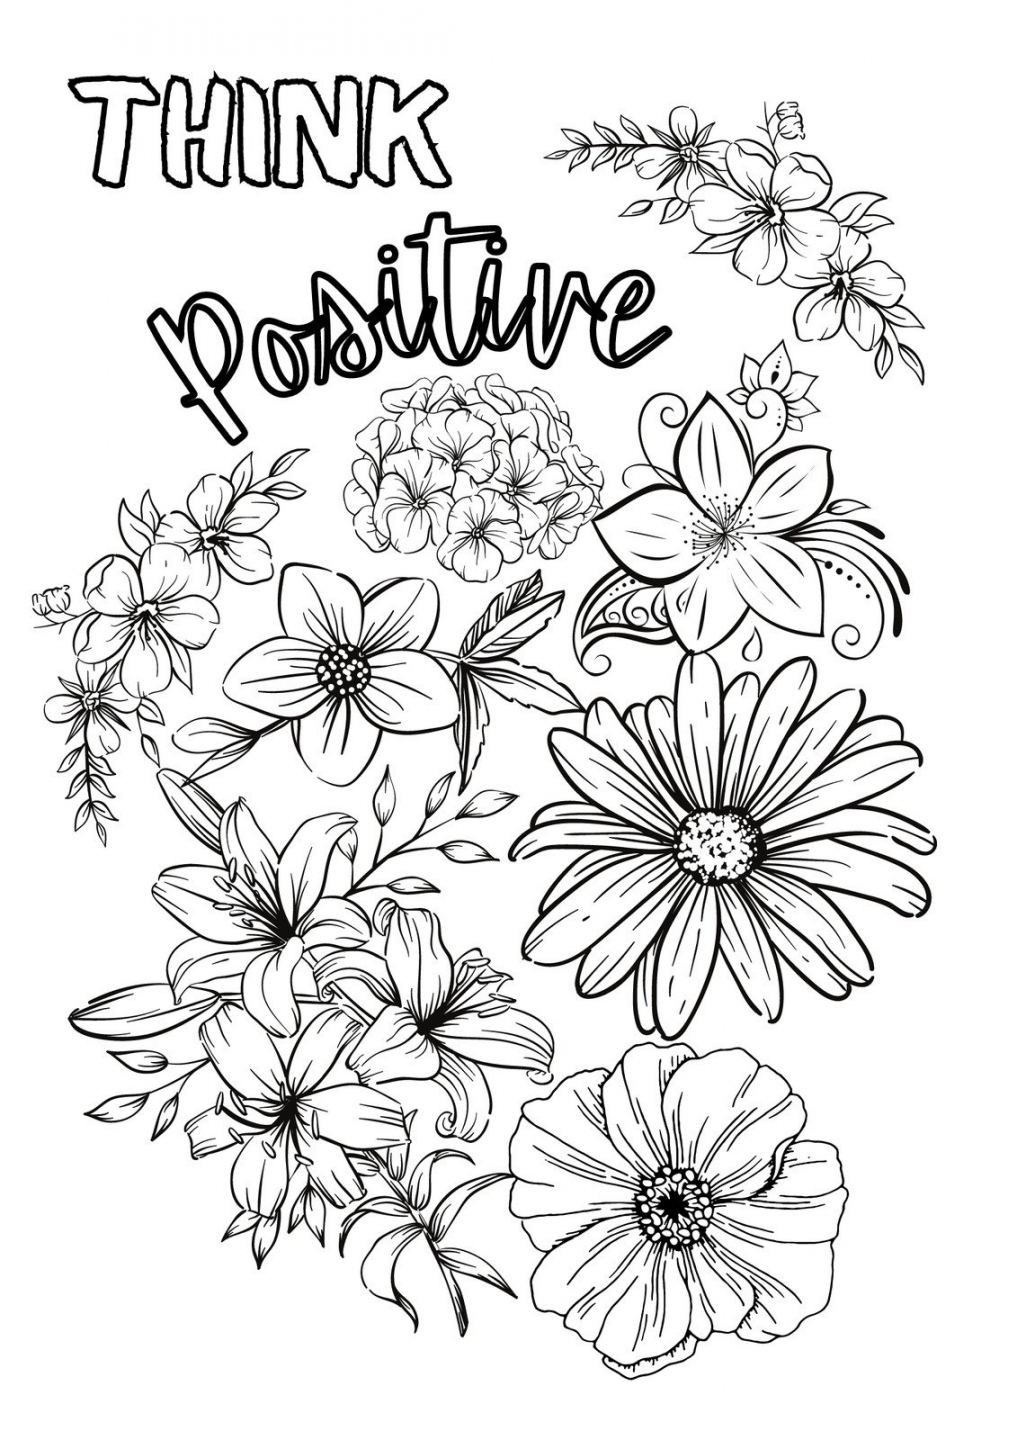 Printable Coloring Pages For Free - Printable - Free printable coloring page templates to customize  Canva